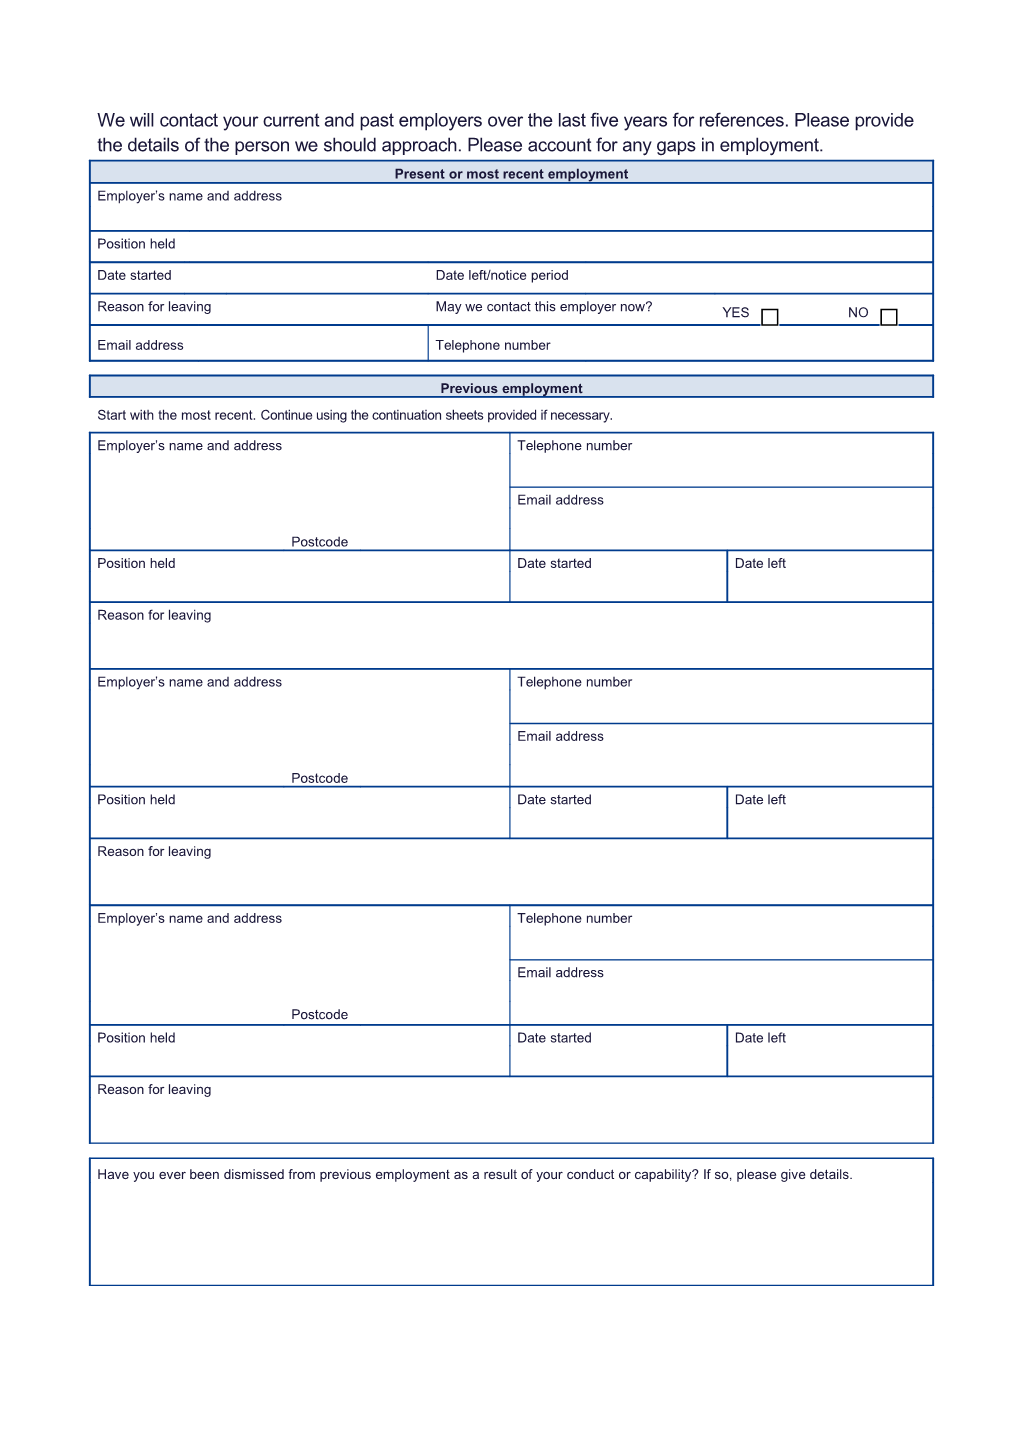 Application Form for Appointment in a Police Staff Role s1